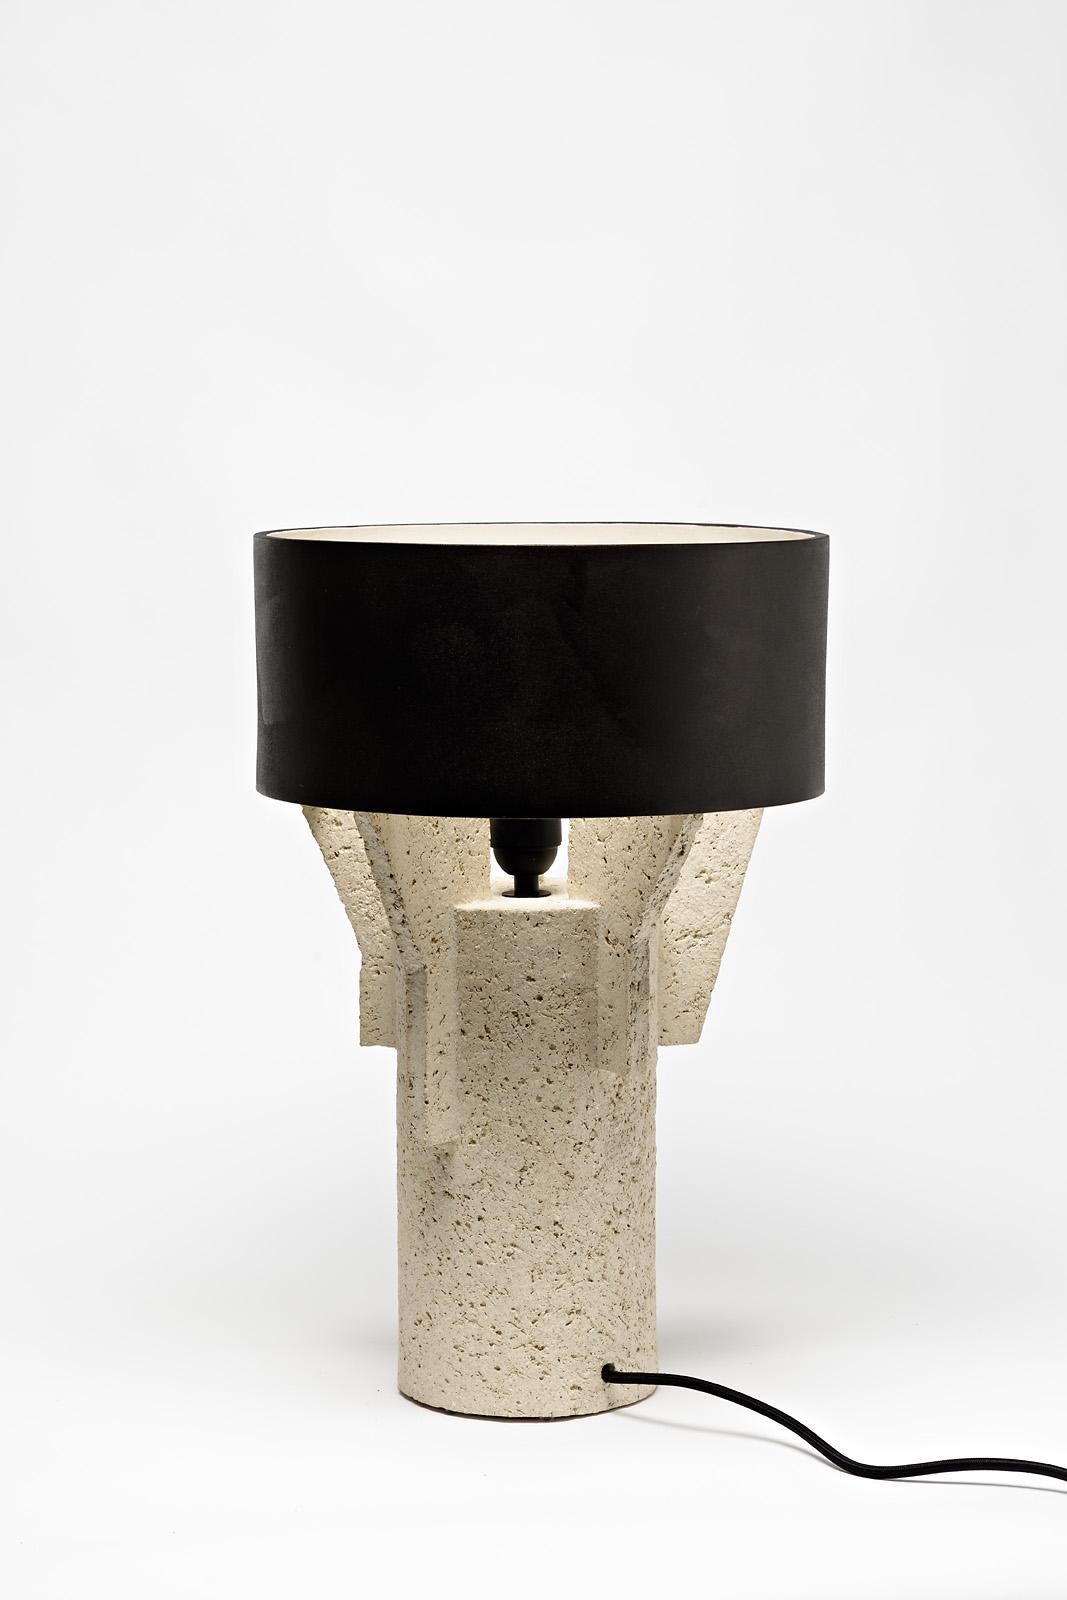 Contemporary Pair of Ceramic Table Lamps by Denis Castaing with Brown Glaze, 2019 For Sale